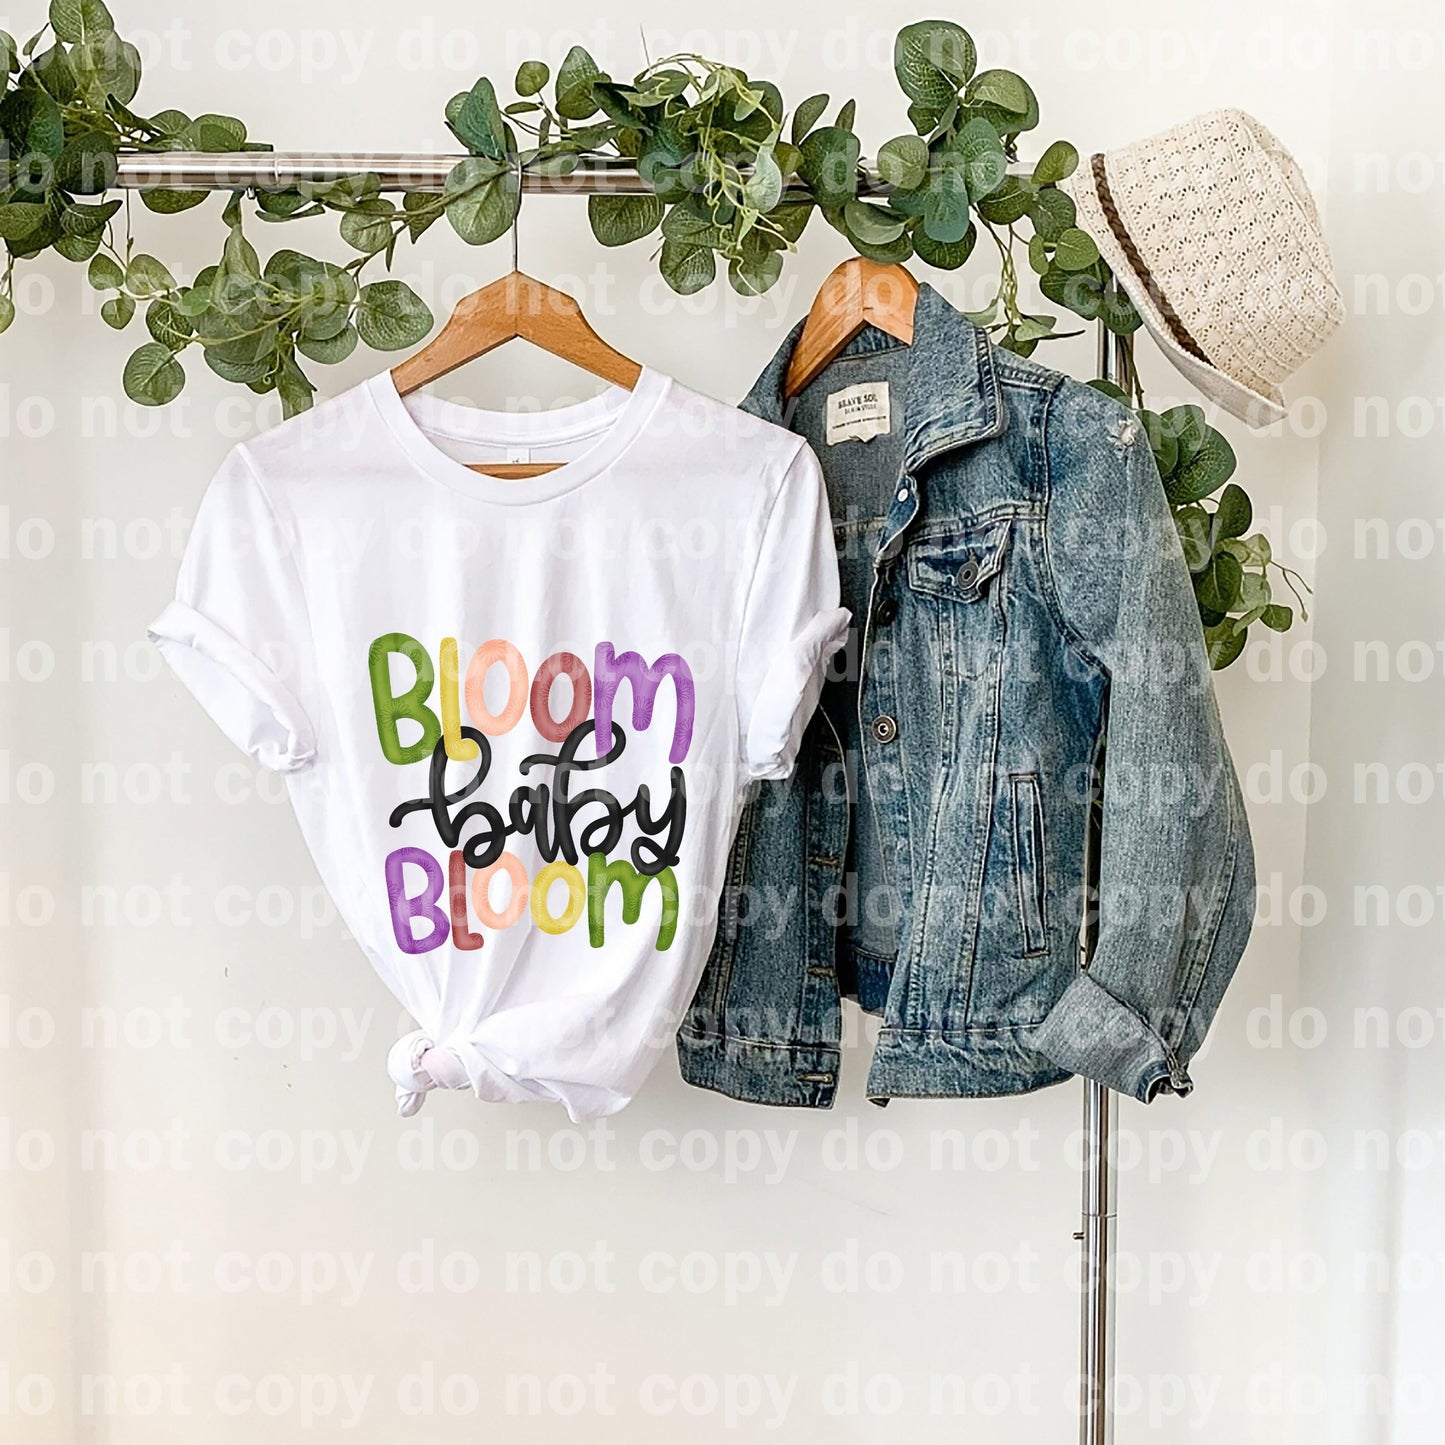 Bloom Baby Bloom Typography Sublimation print